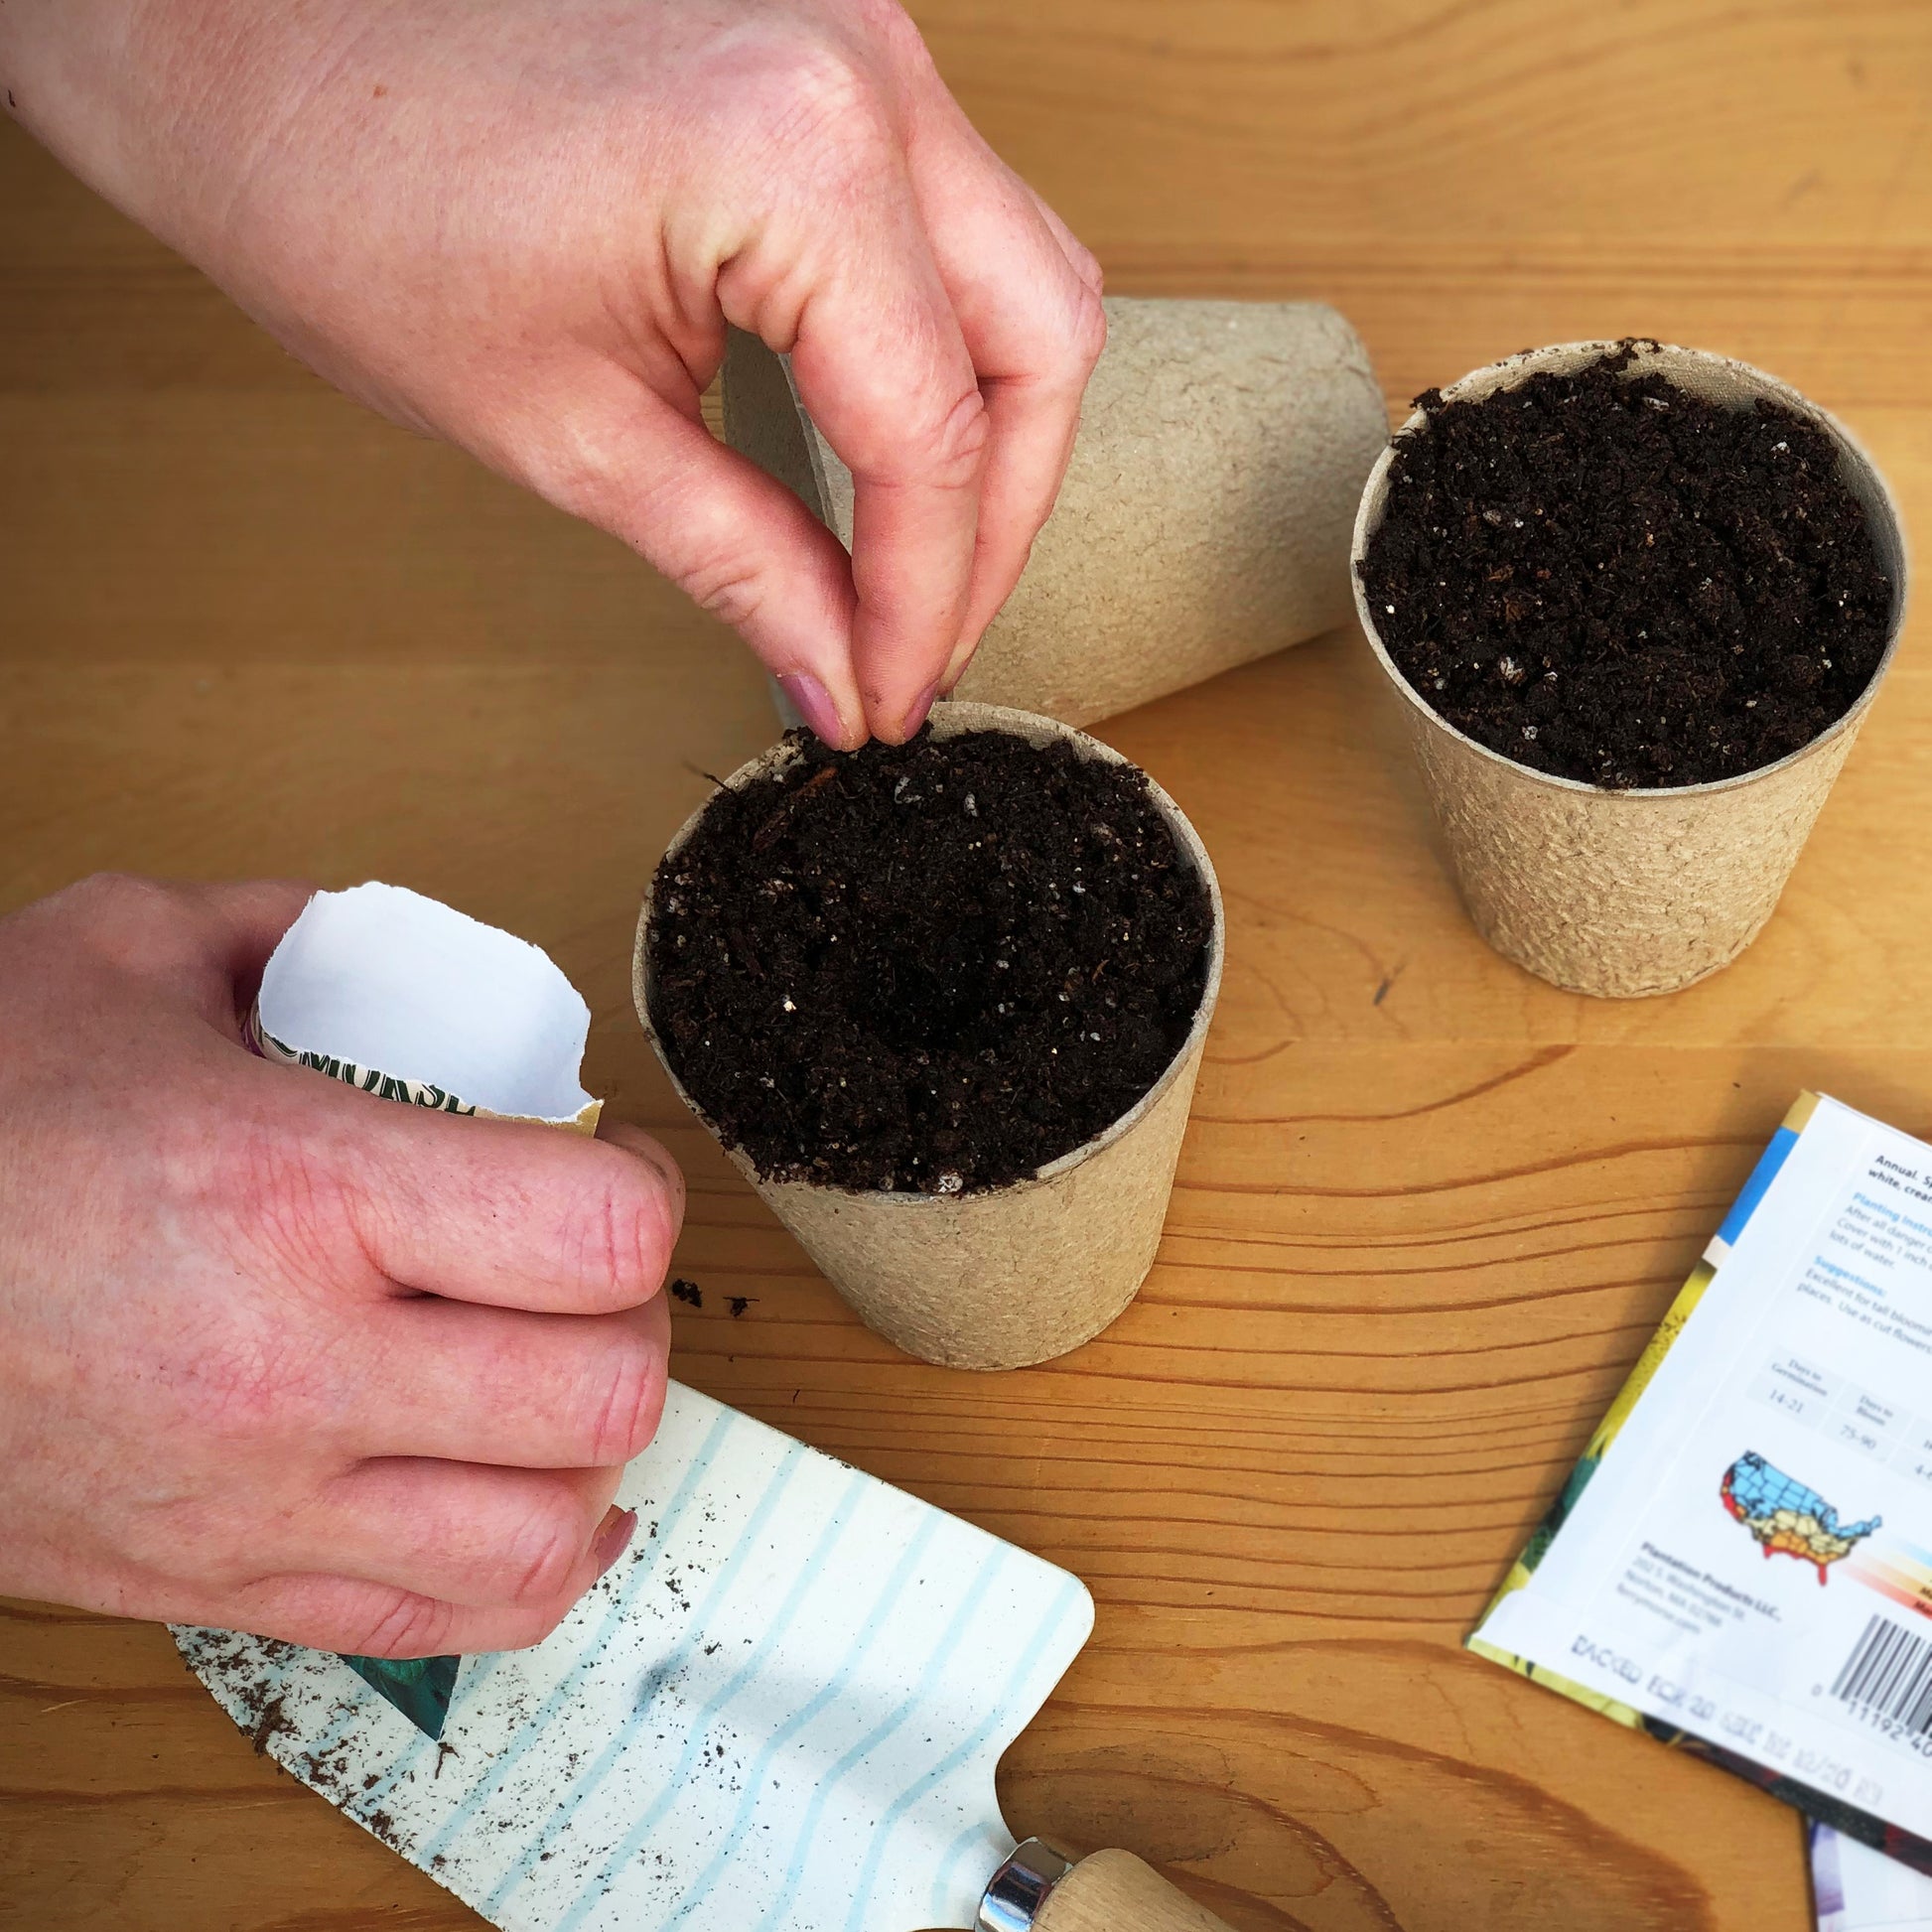 Sowing Organic Evergreen Bunching Onion Seeds in biodegradable peat pots.